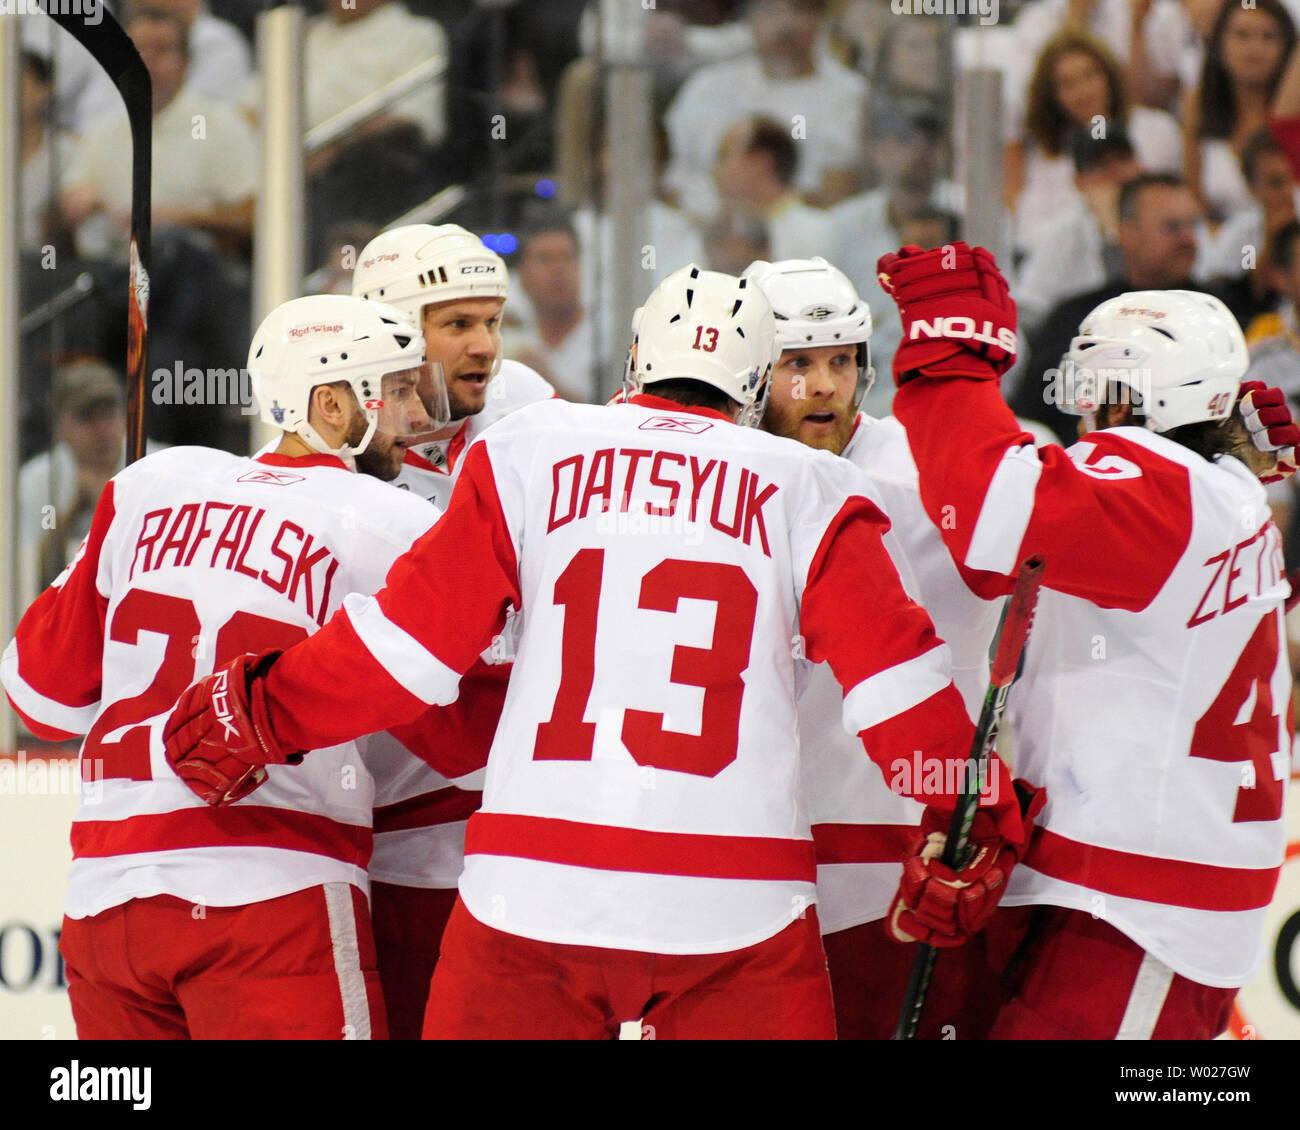 Pavel Datsyuk (illness) out for Detroit Red Wings at Chicago Blachawks